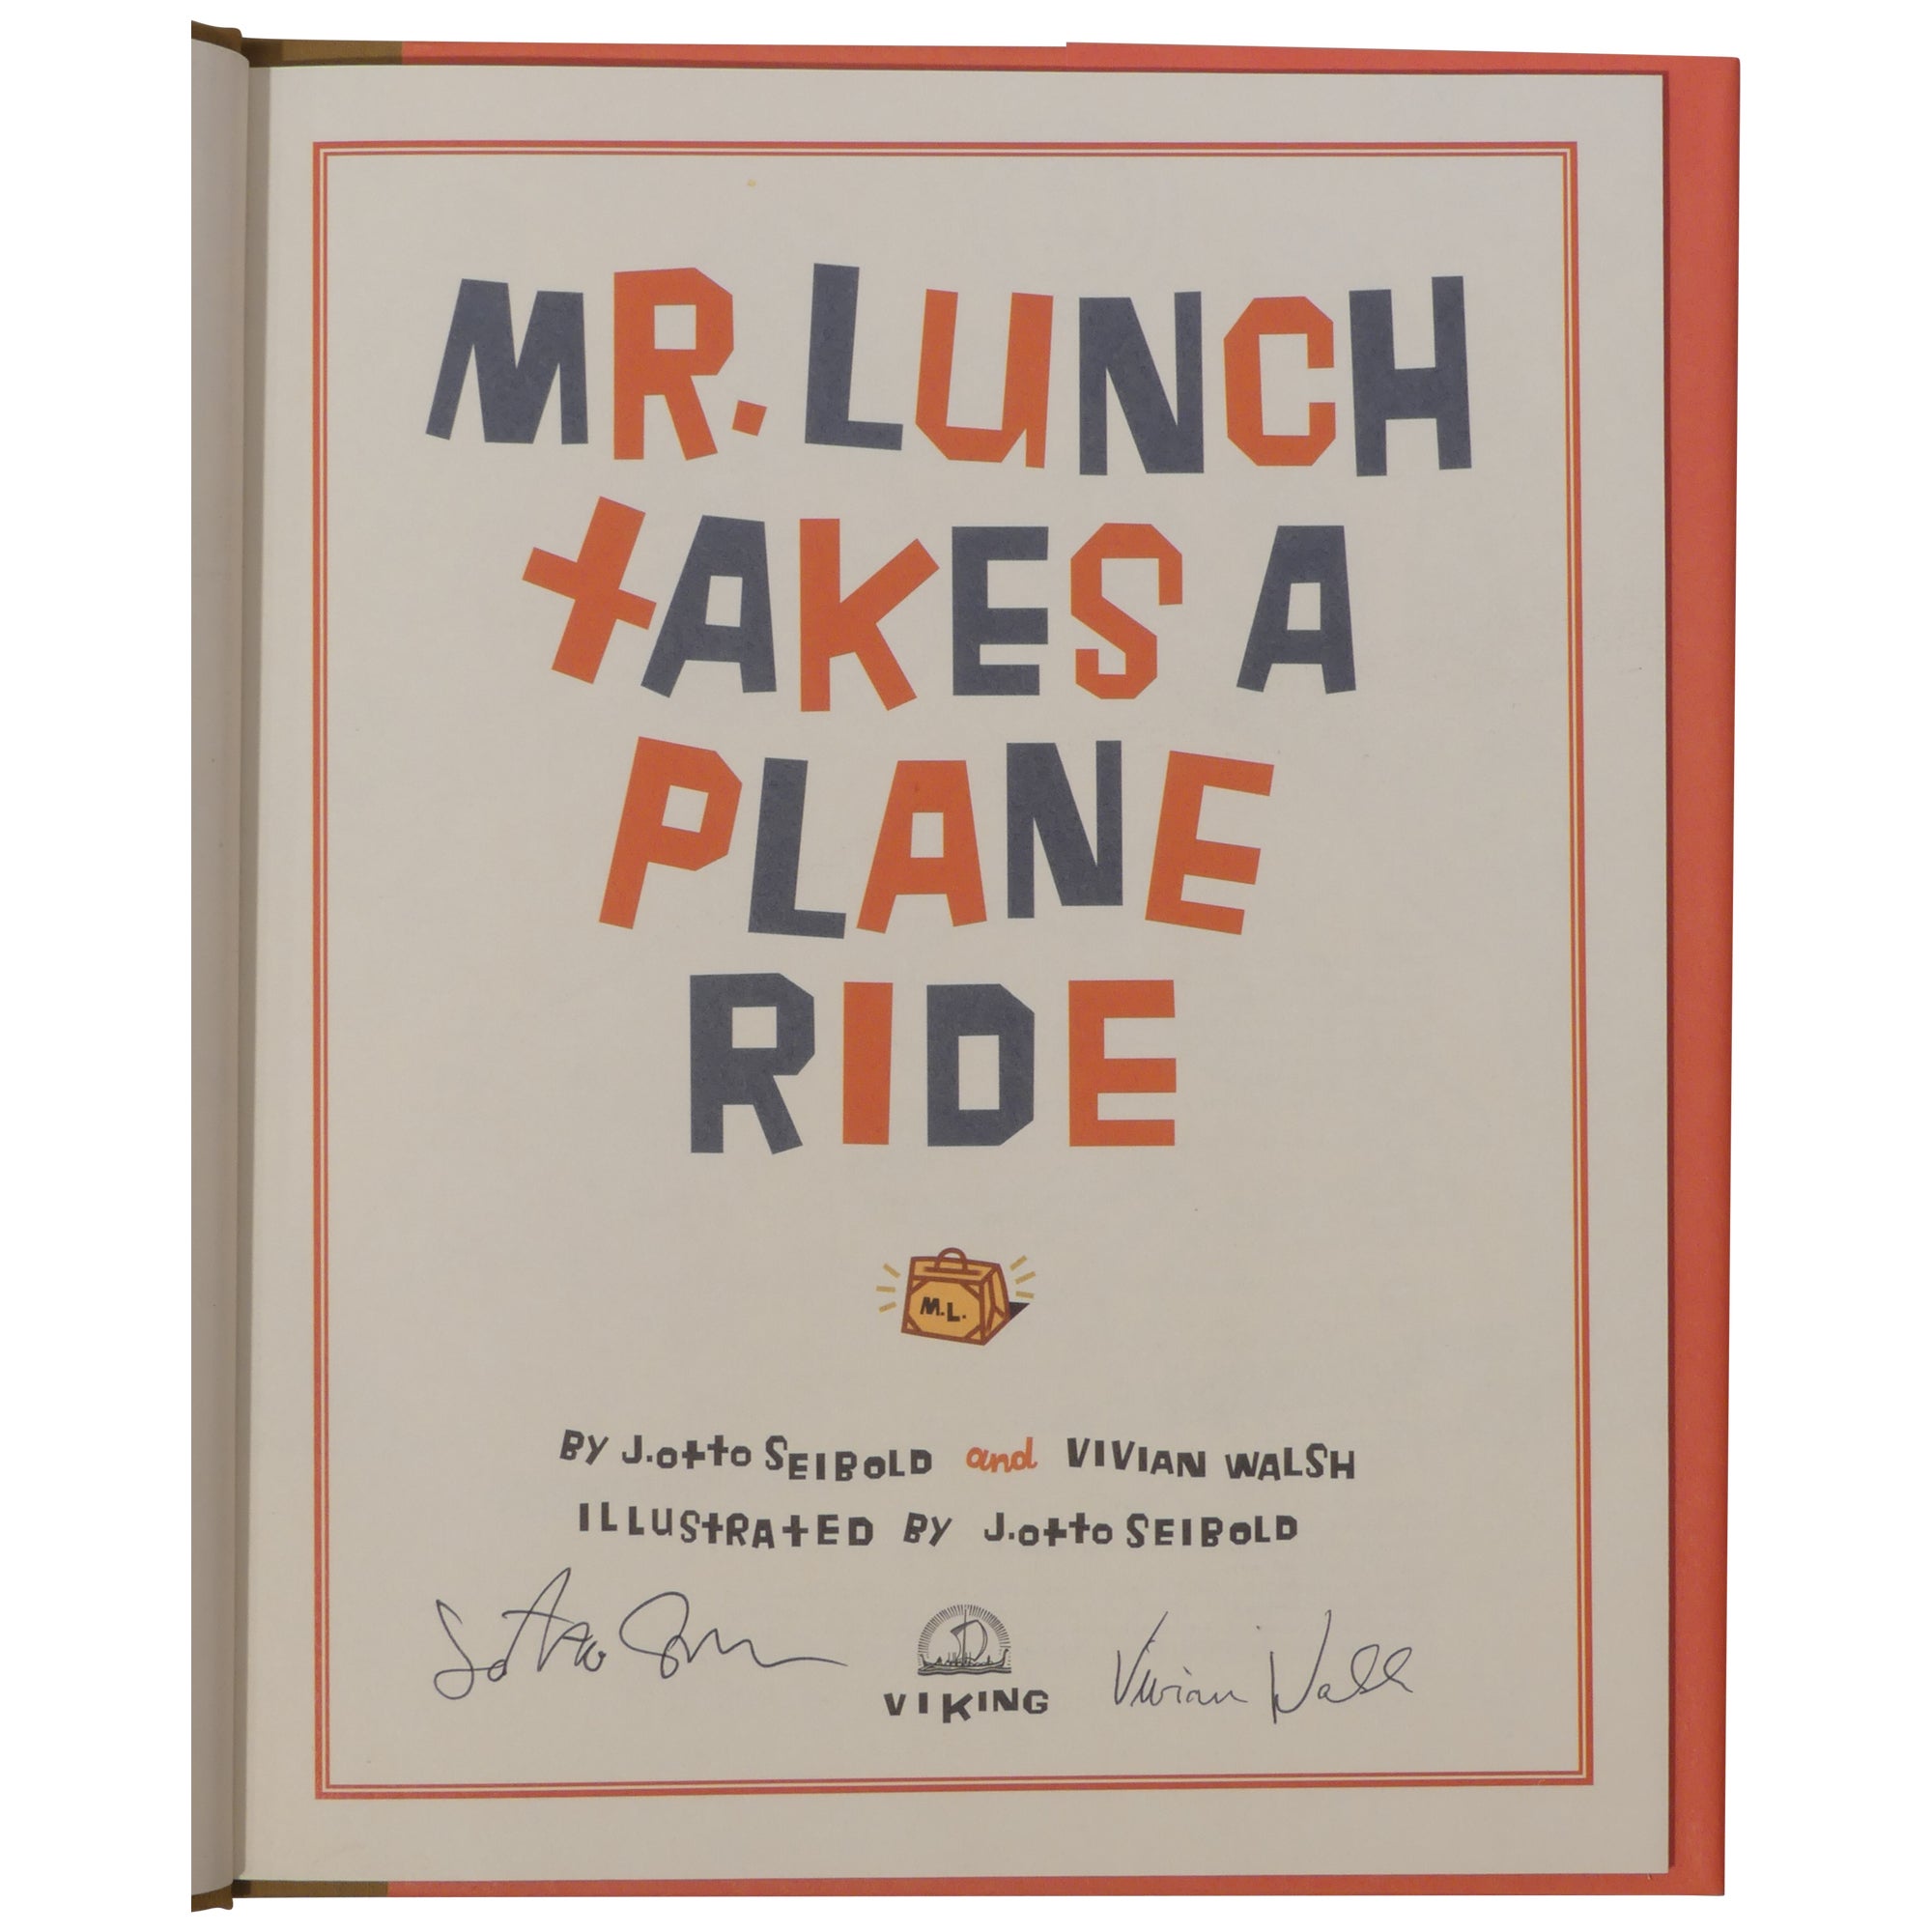 Mr. Lunch Takes a Plane Ride by J. Otto Seibold